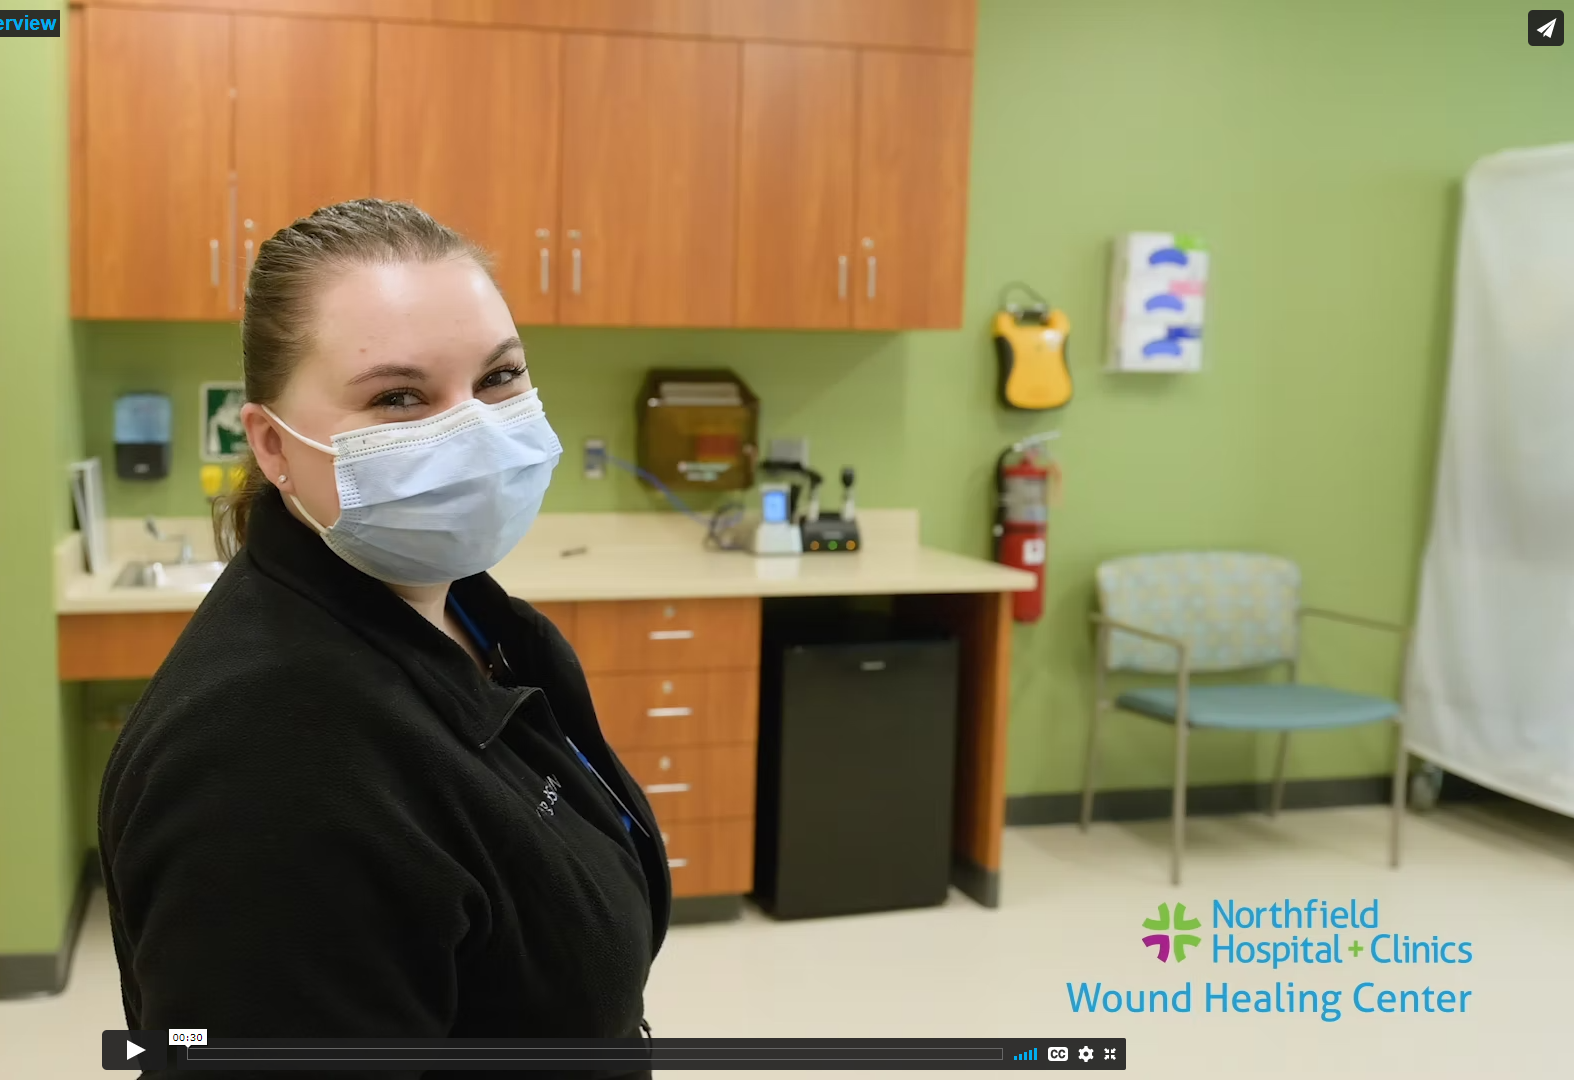 NH+C's Wound Healing Center’s healing rate hits Top 10 nationwide